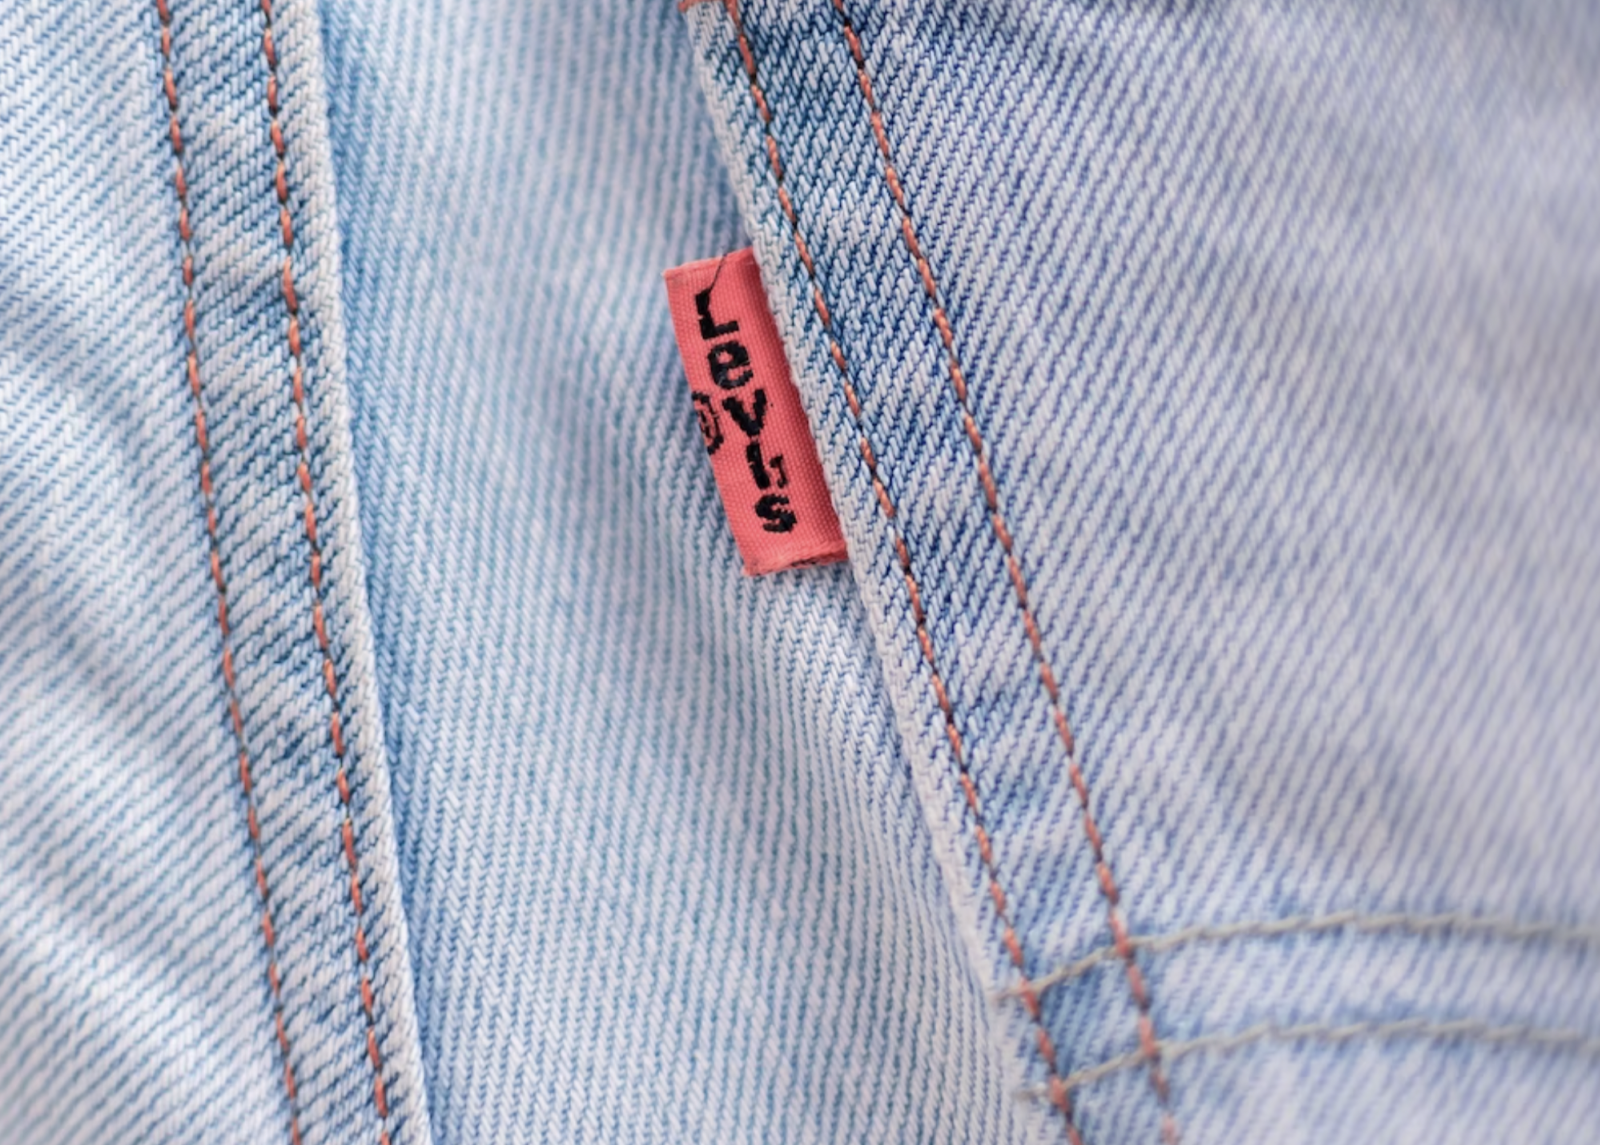 Levi's jeans with a red tab